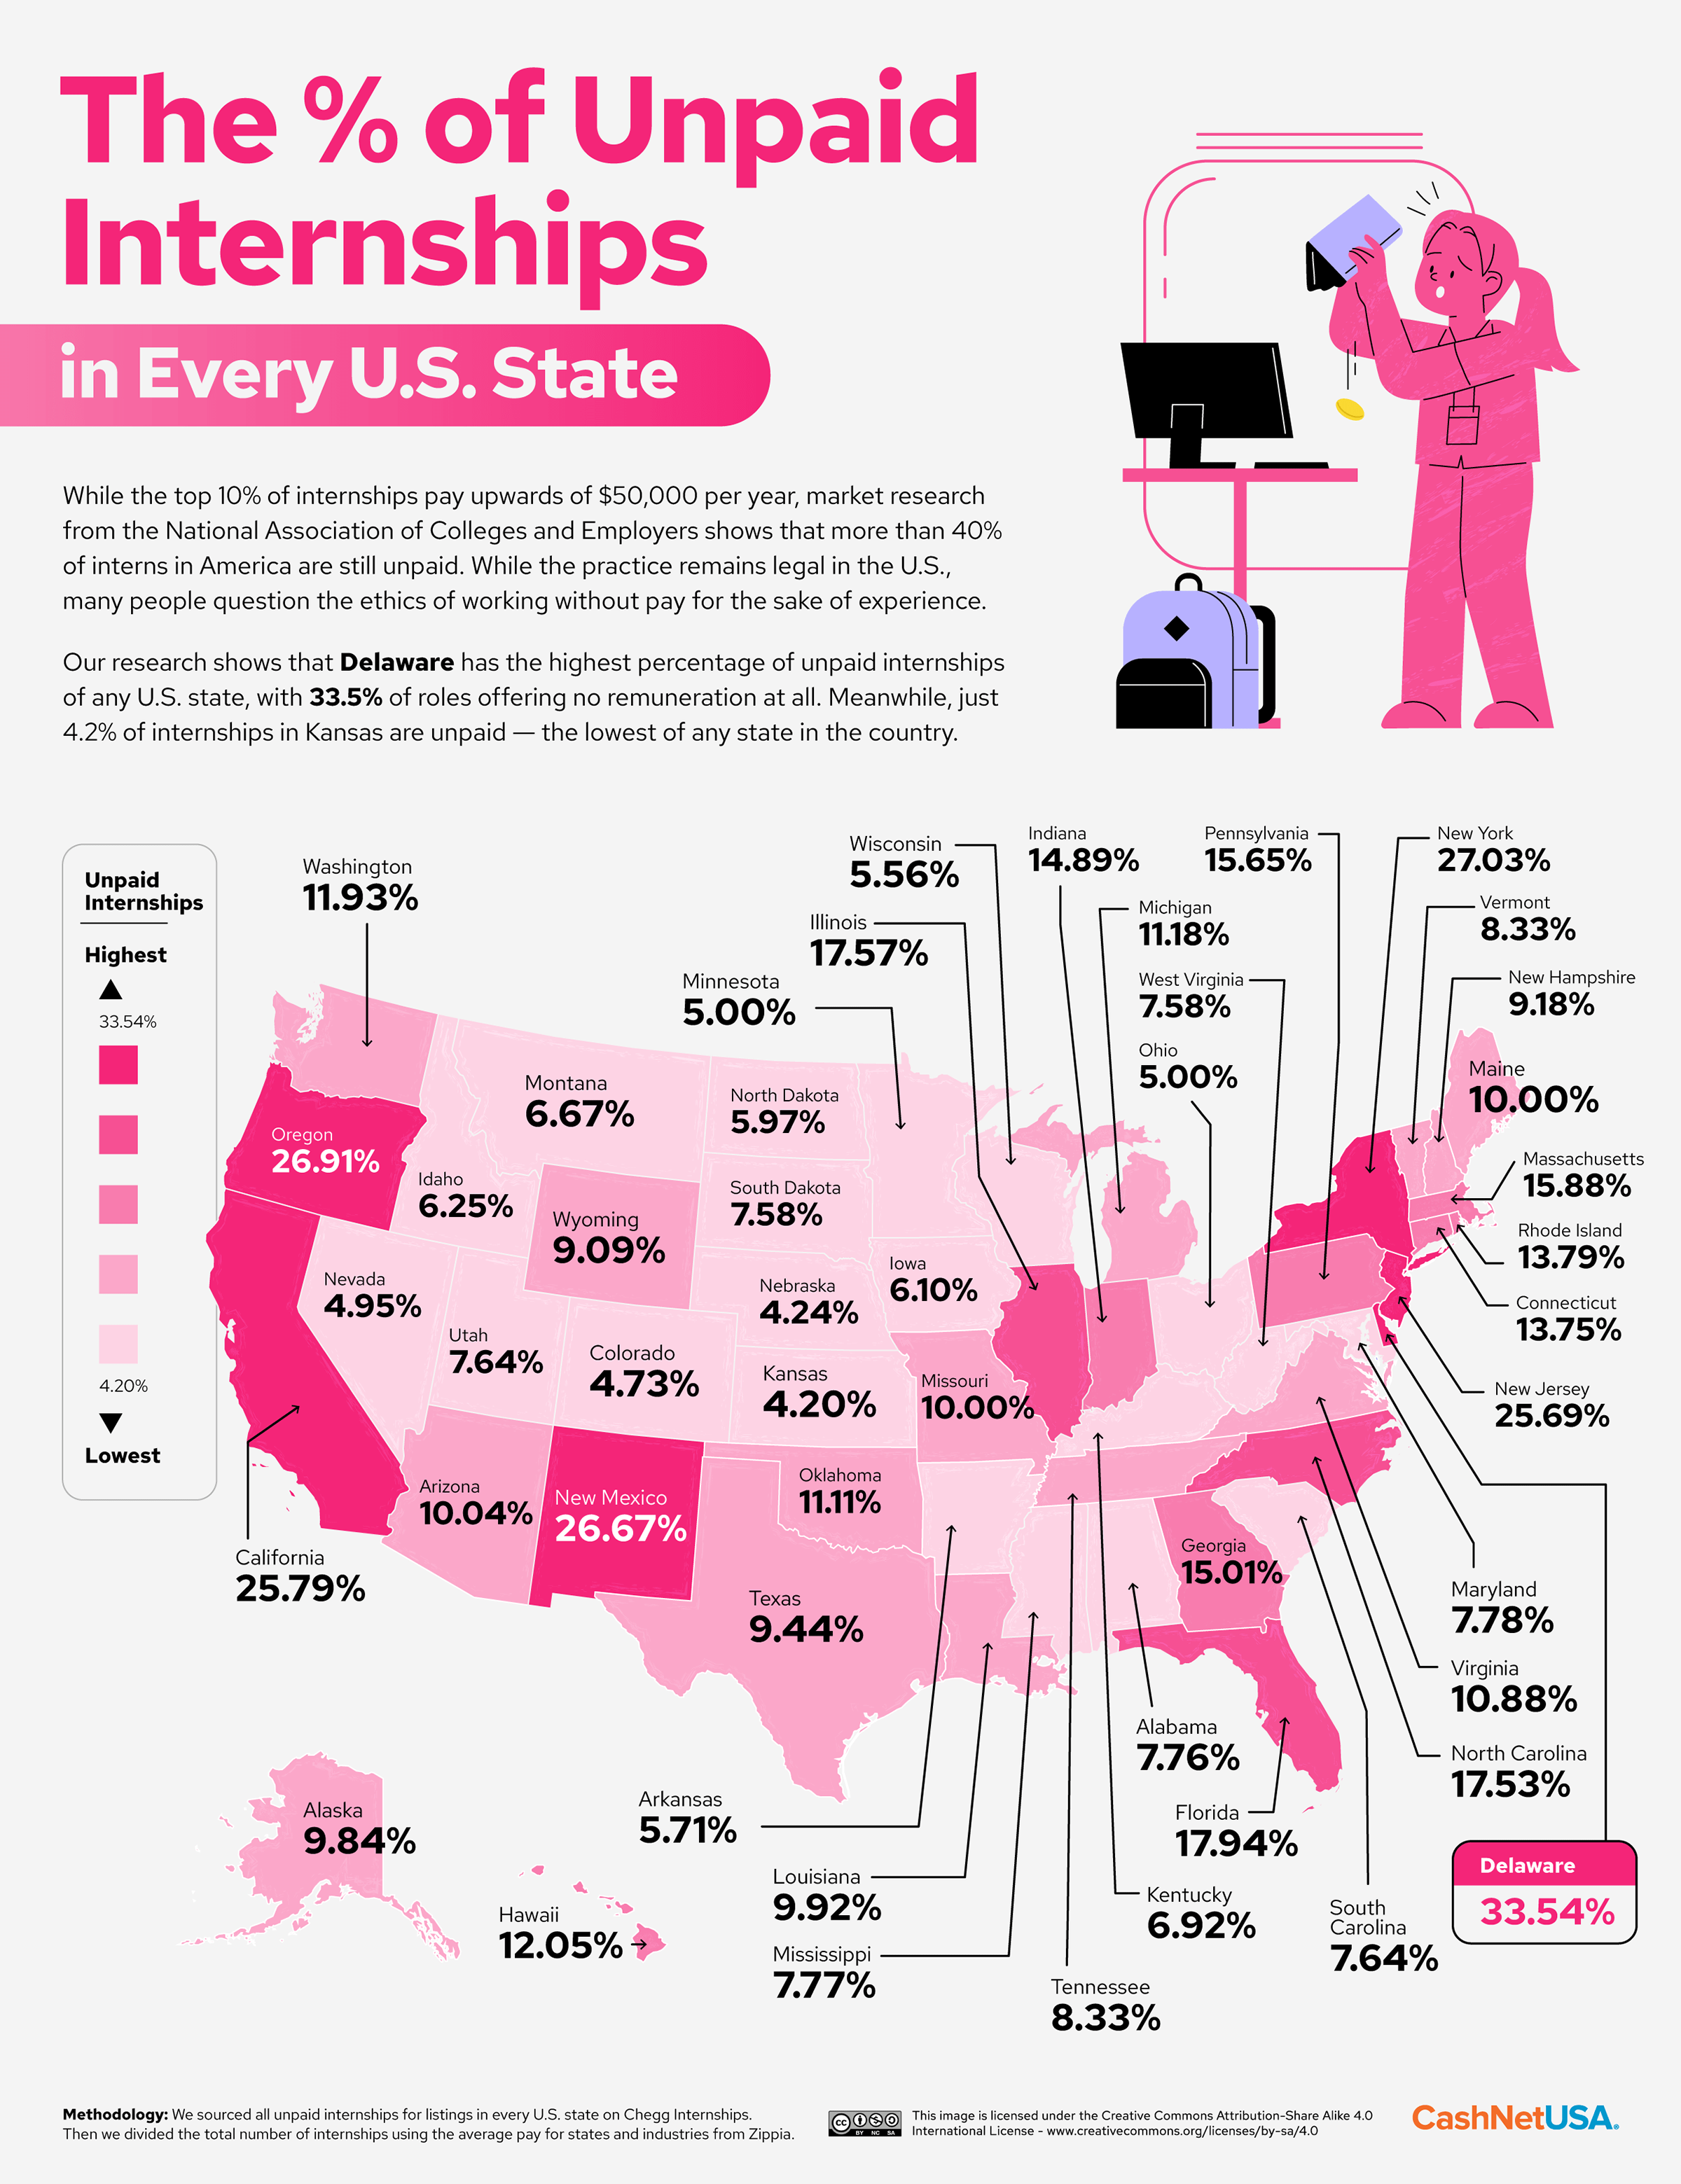 A map of the U.S. with the rate of unpaid internships in every state.